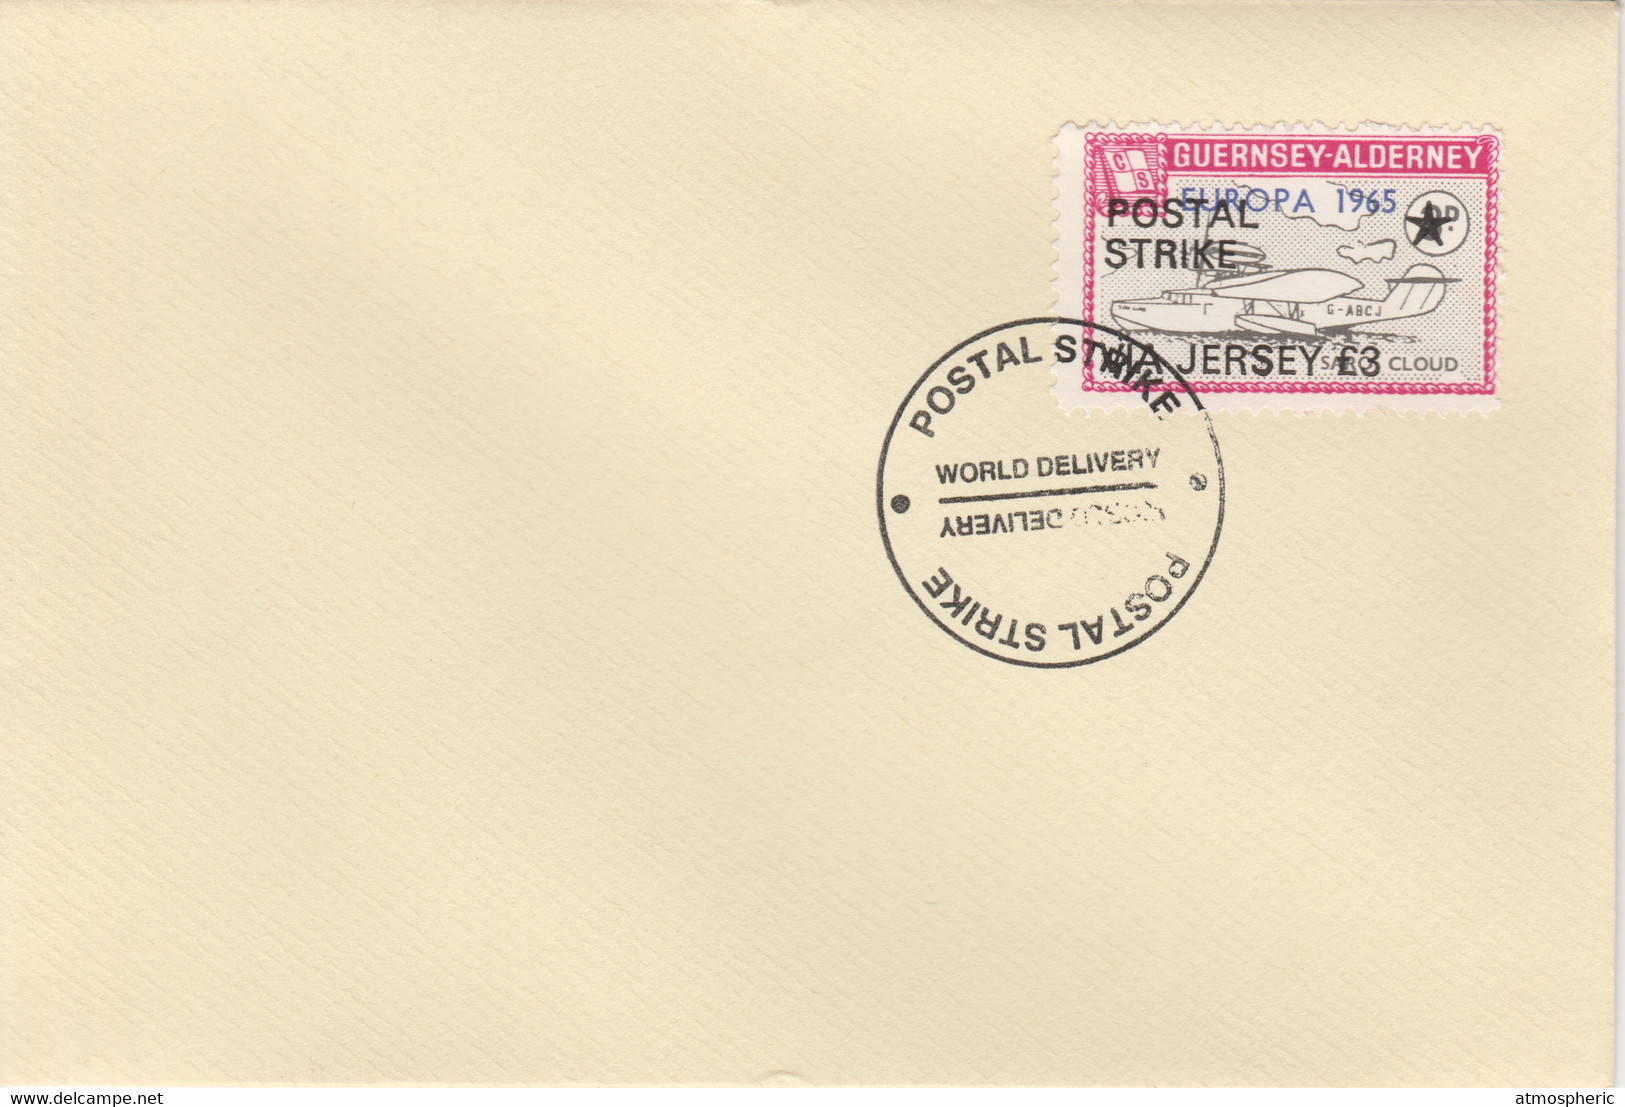 Guernsey - Alderney 1971 Postal Strike Cover To Jersey Bearing Flying Boat Saro Cloud 3d Overprinted Europa 1965 - Non Classés